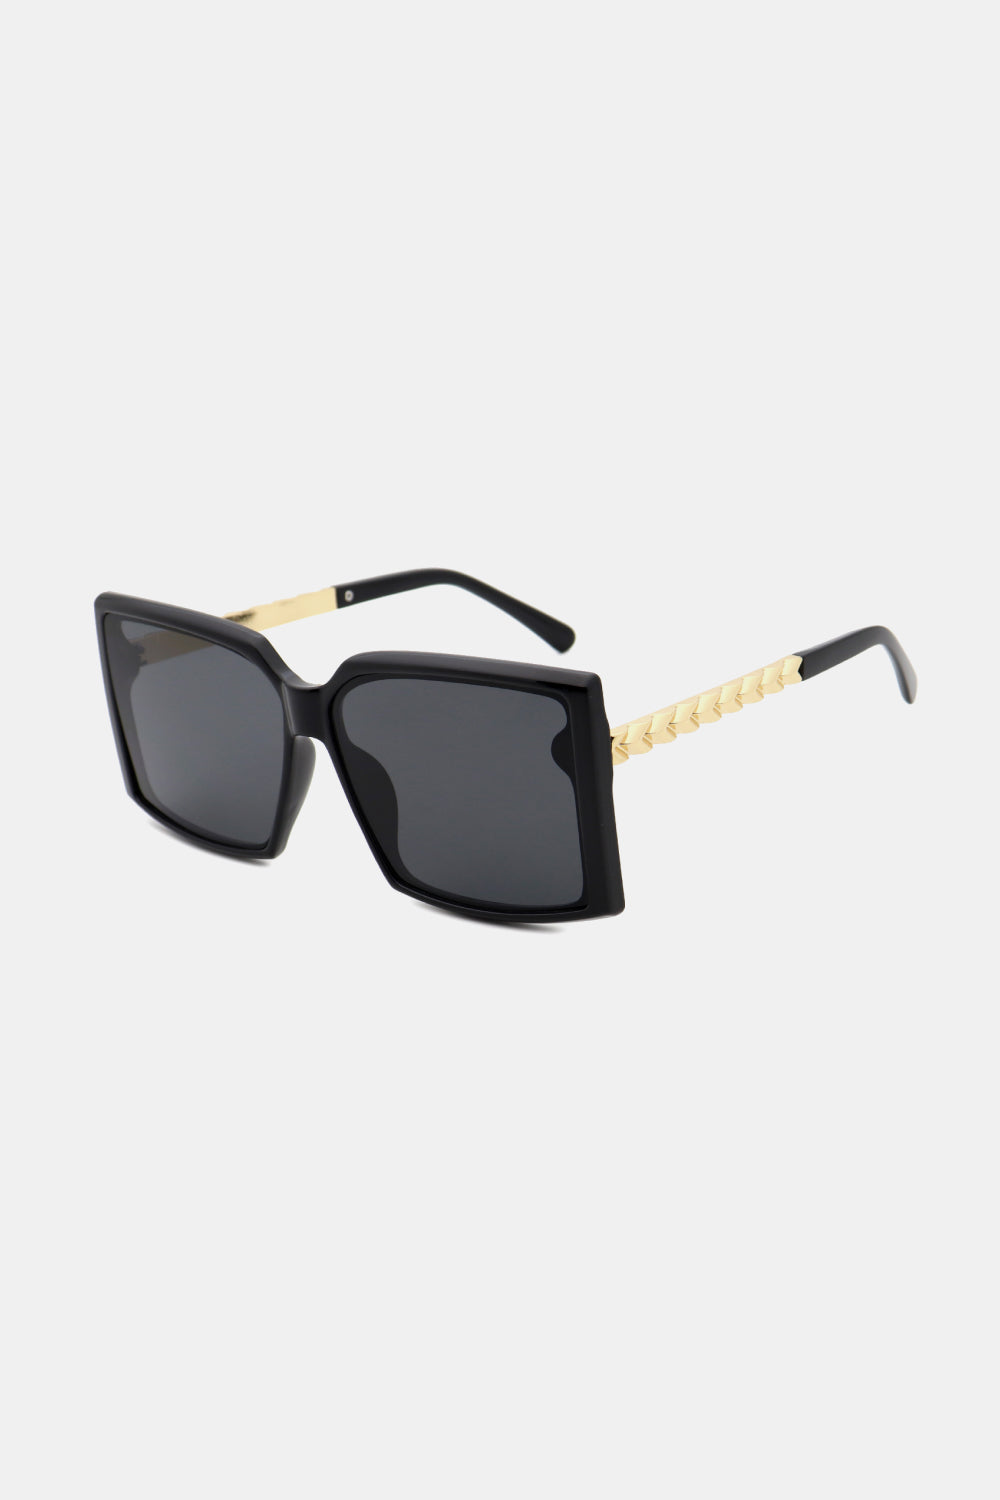 Polycarbonate Frame Square Sunglasses - Black / One Size Apparel & Accessories Wynter 4 All Seasons